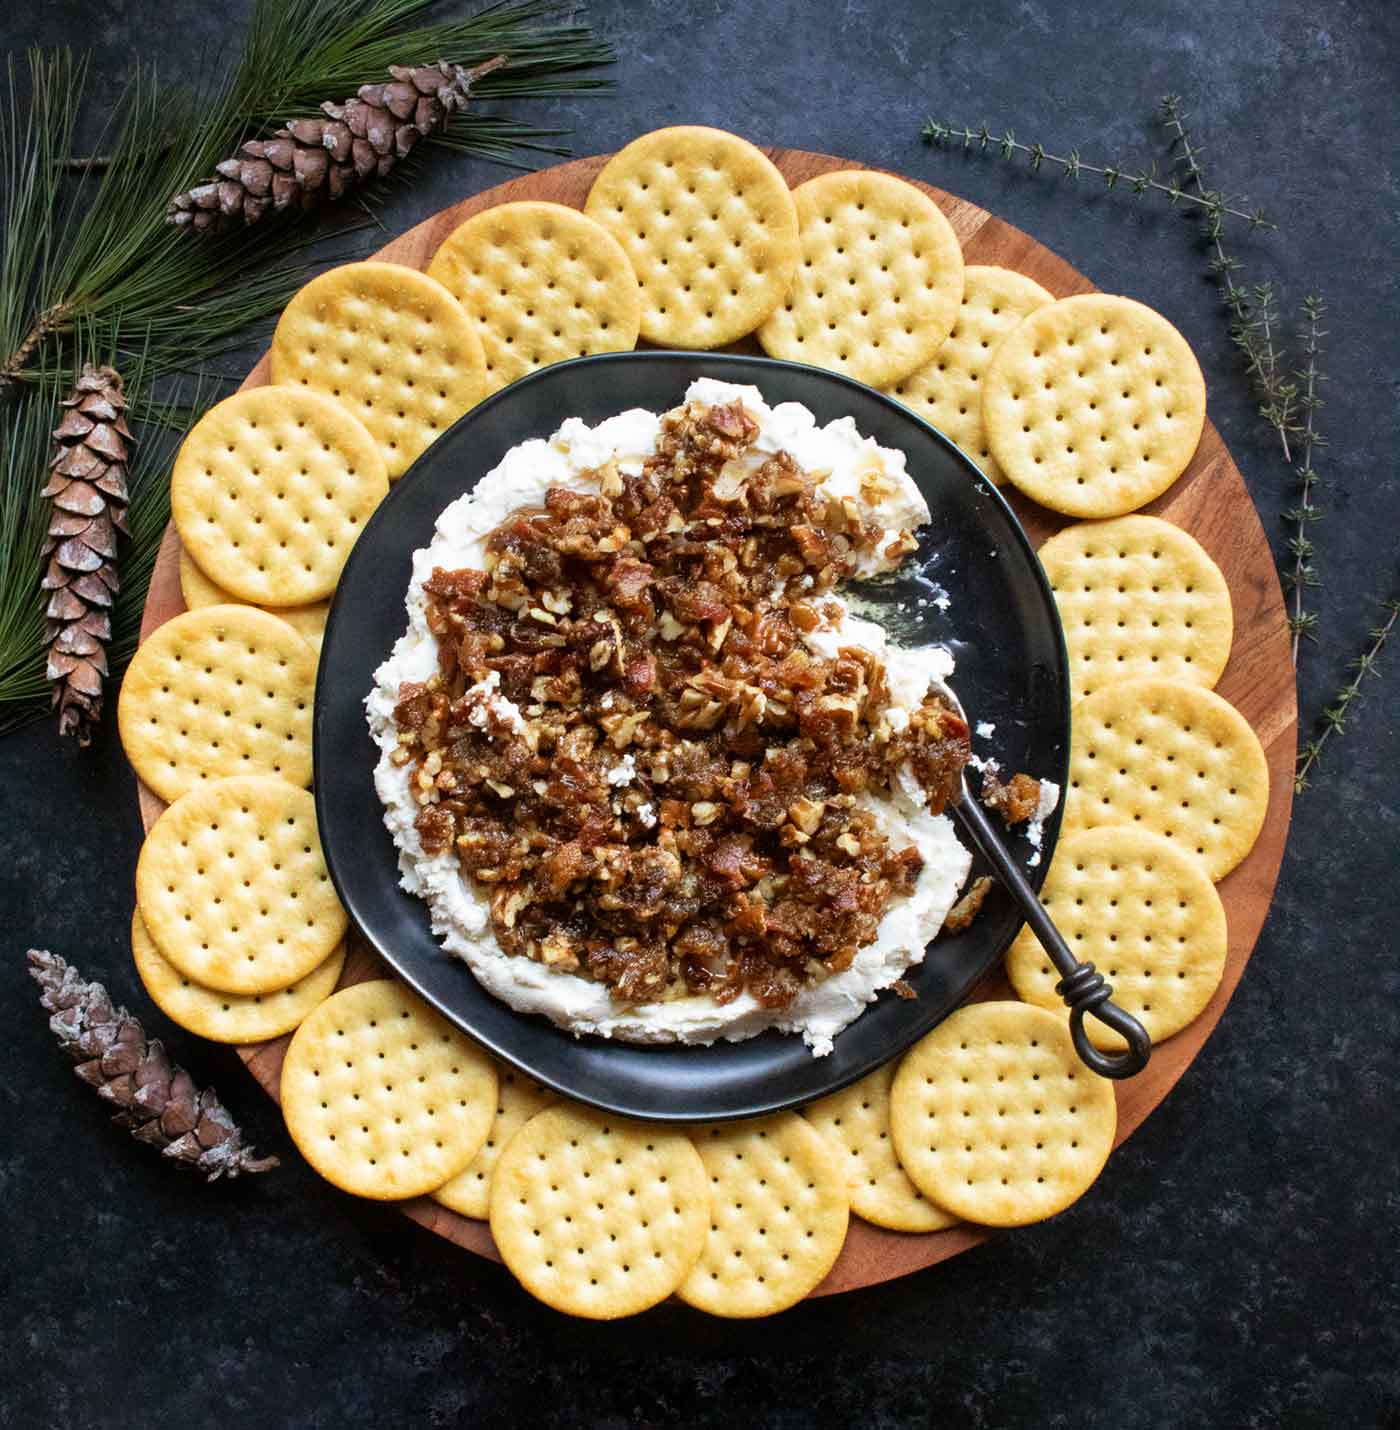 Creamy Goat Cheese Bacon and Dates Dip with crackers on a wooden serving board.